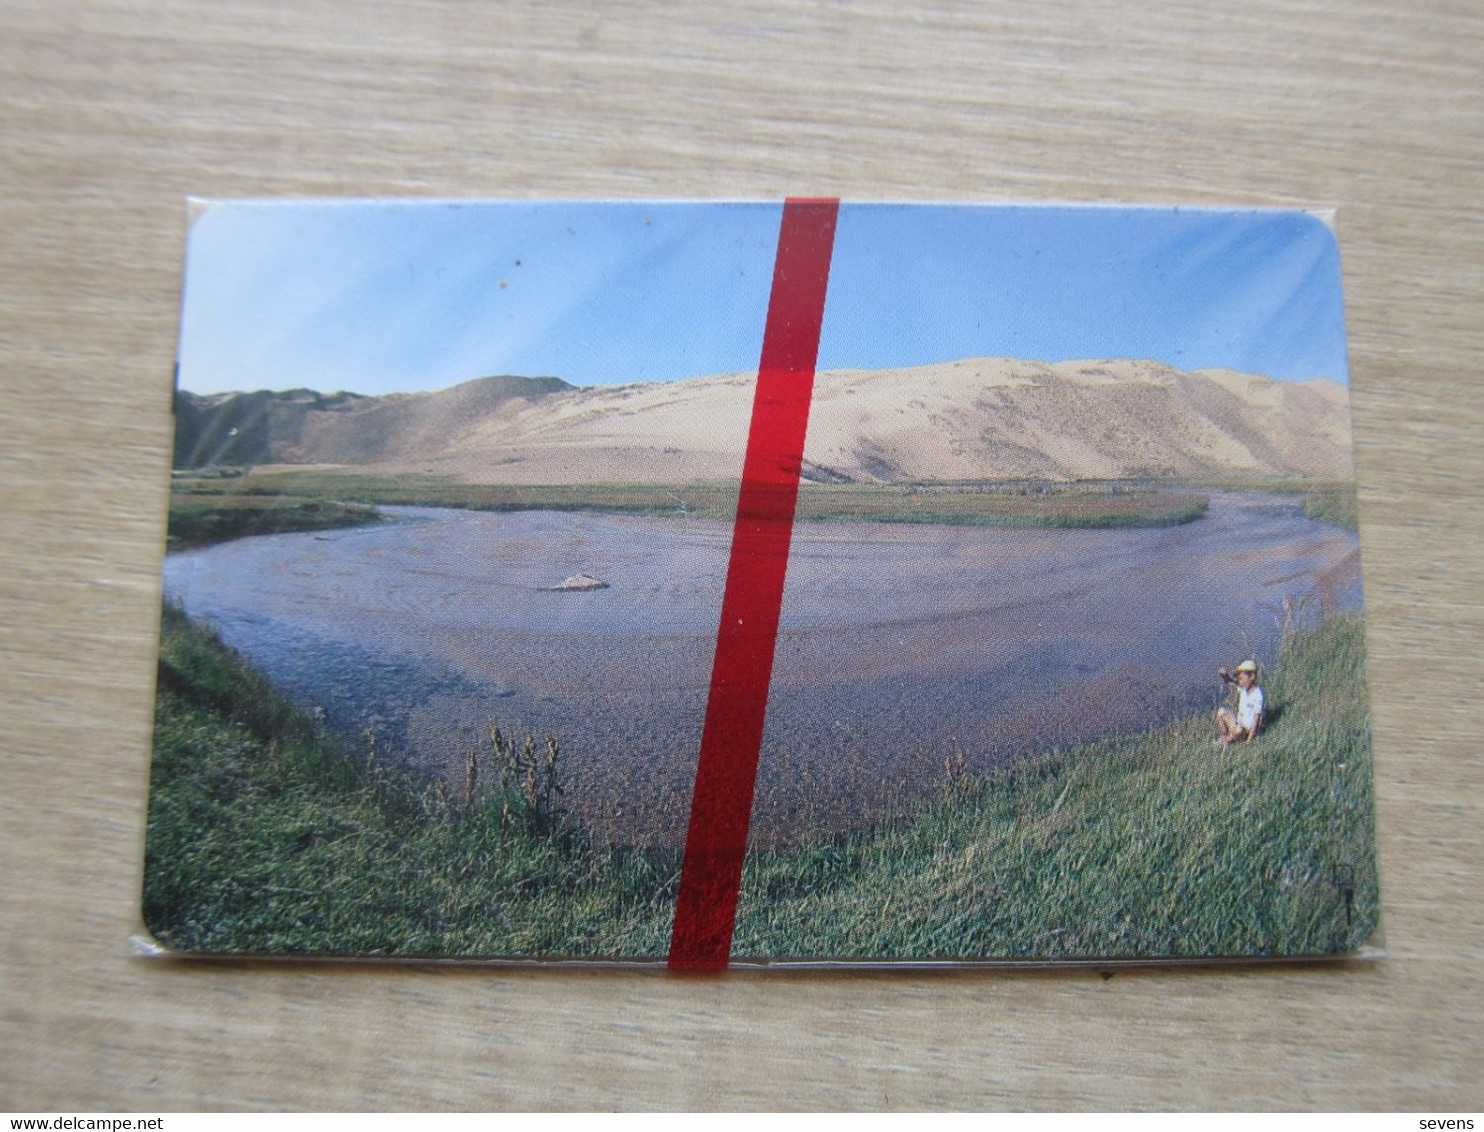 Mon-02 First Issued Chip Card, Child By Lake, 150units, GEM1 Chip,mint In Blister - Mongolei